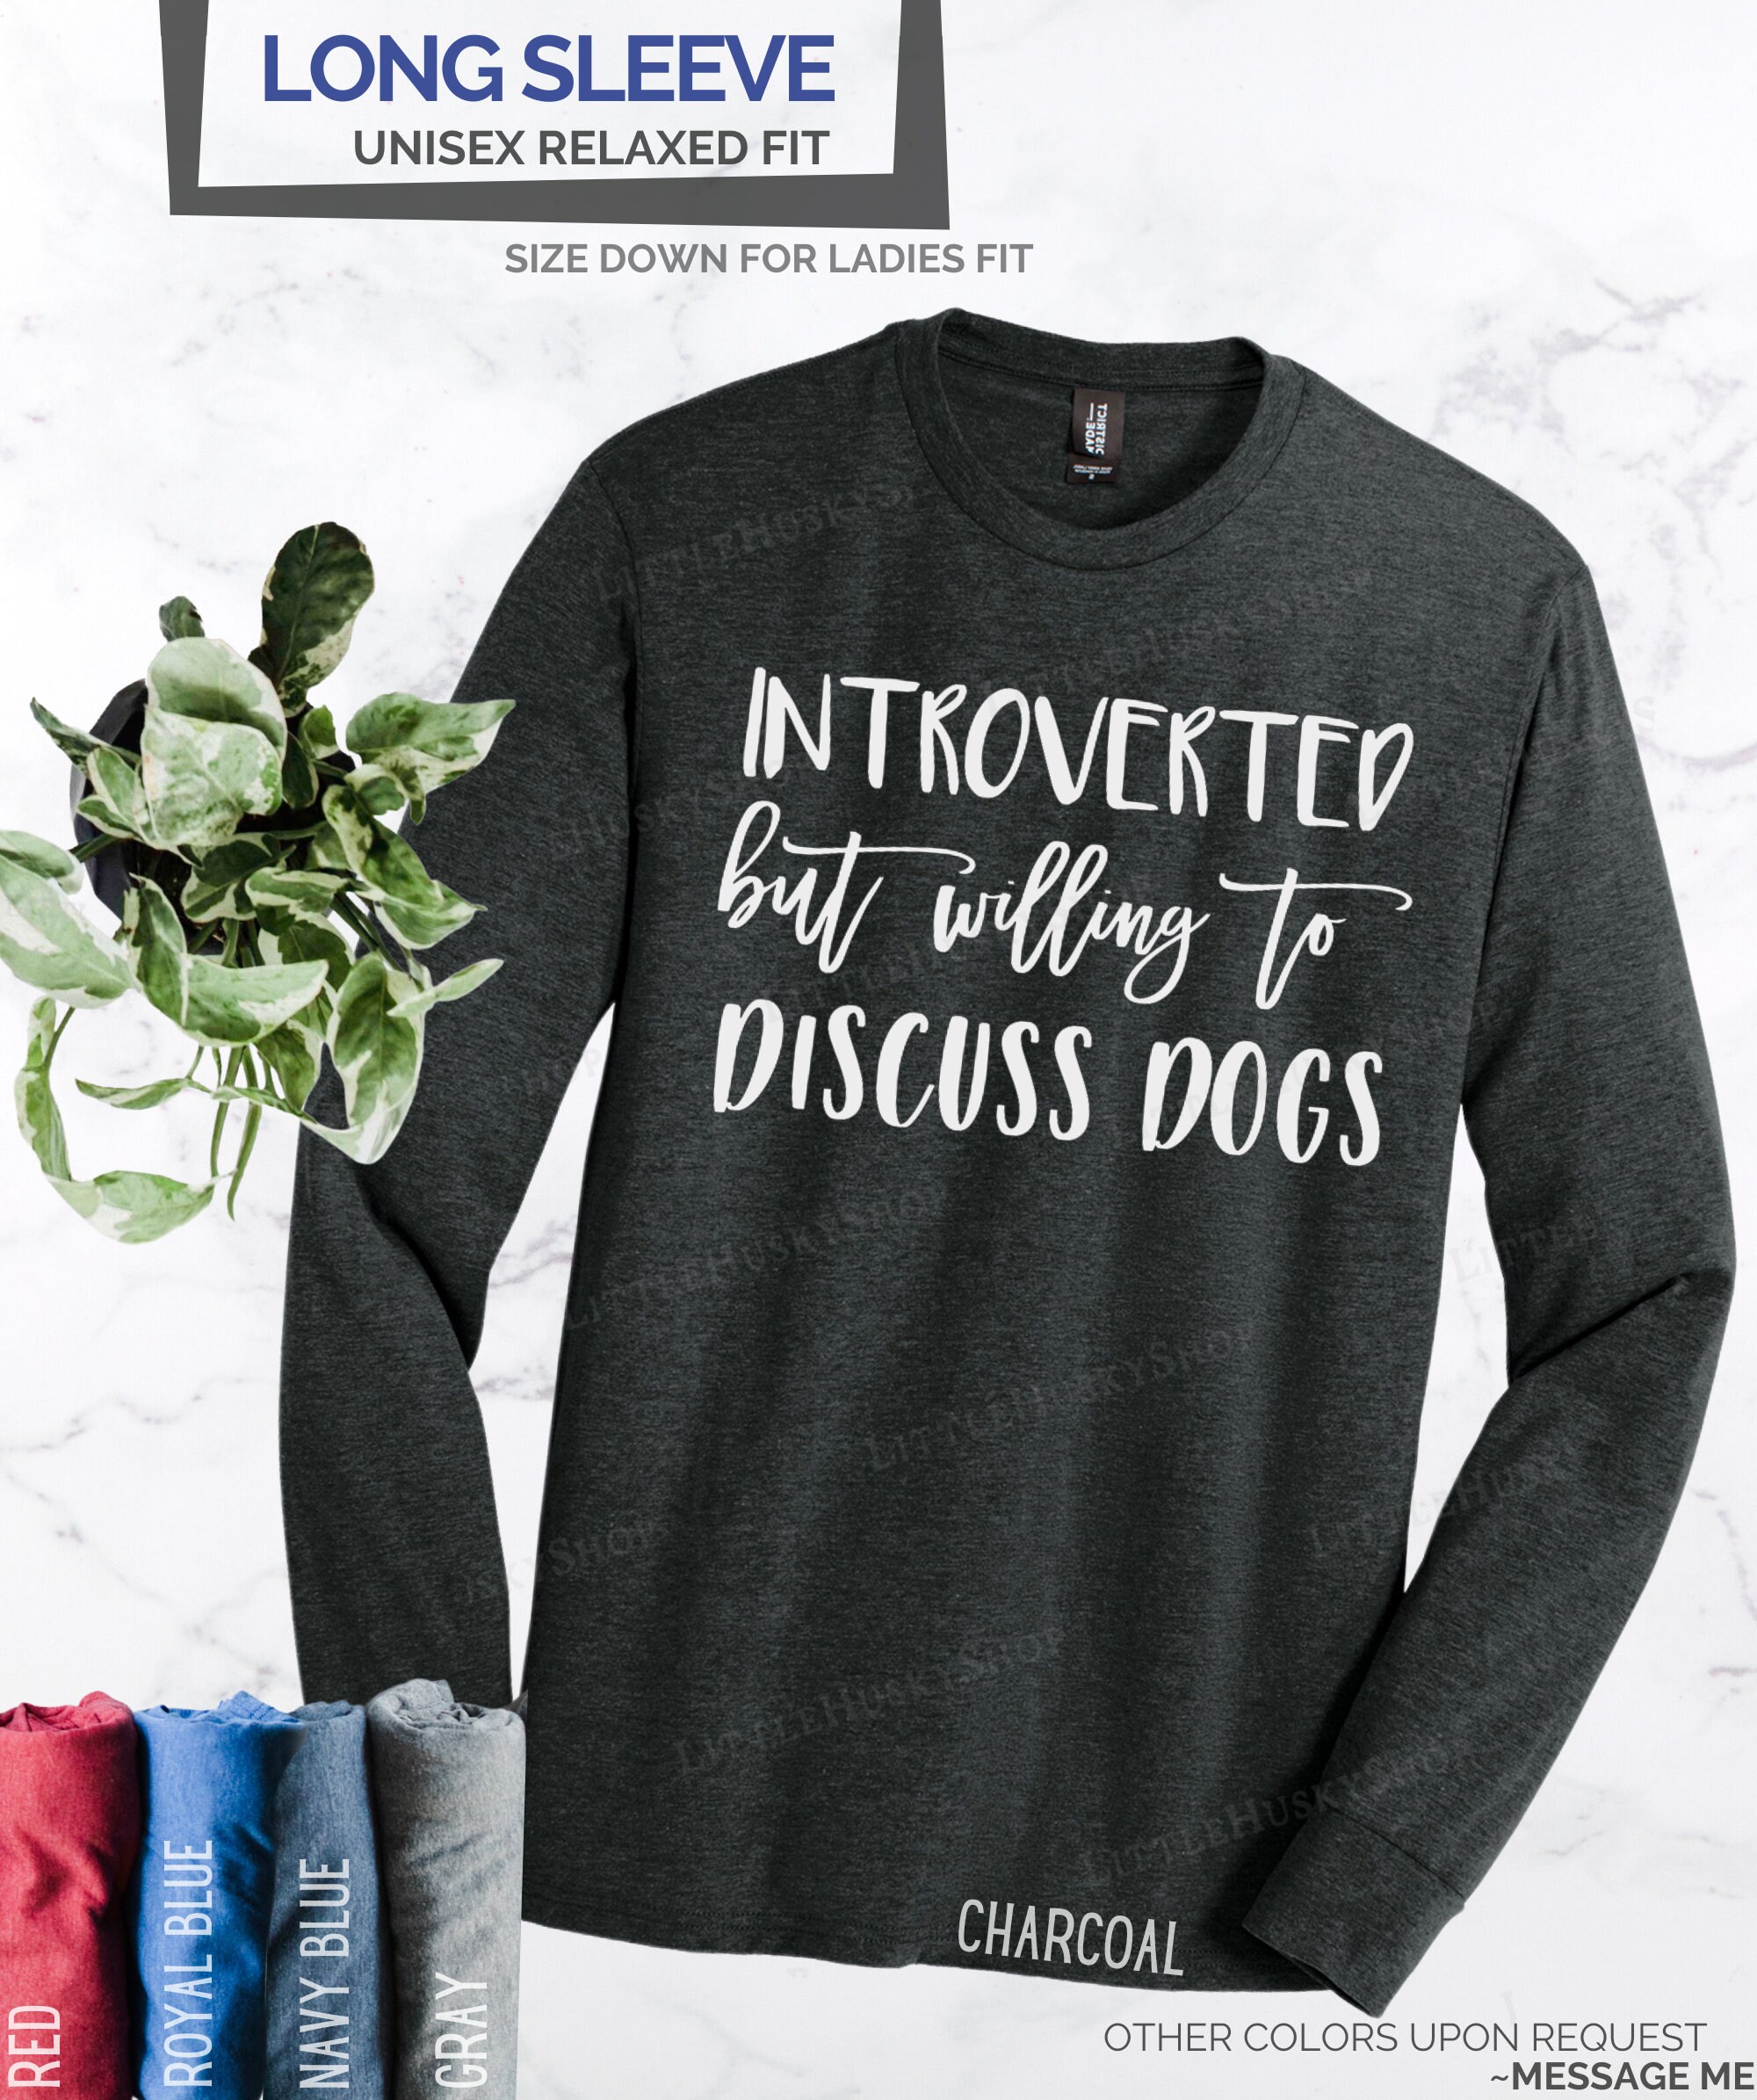 introVETed Leash Your Dog Unisex T-shirt,Reactive Dog Shirt,Leash Law Shirt,Dog Park Shirt,Dog Safety Shirt,Dog Owner Shirt,Dog Shirt,PSA Shirt.